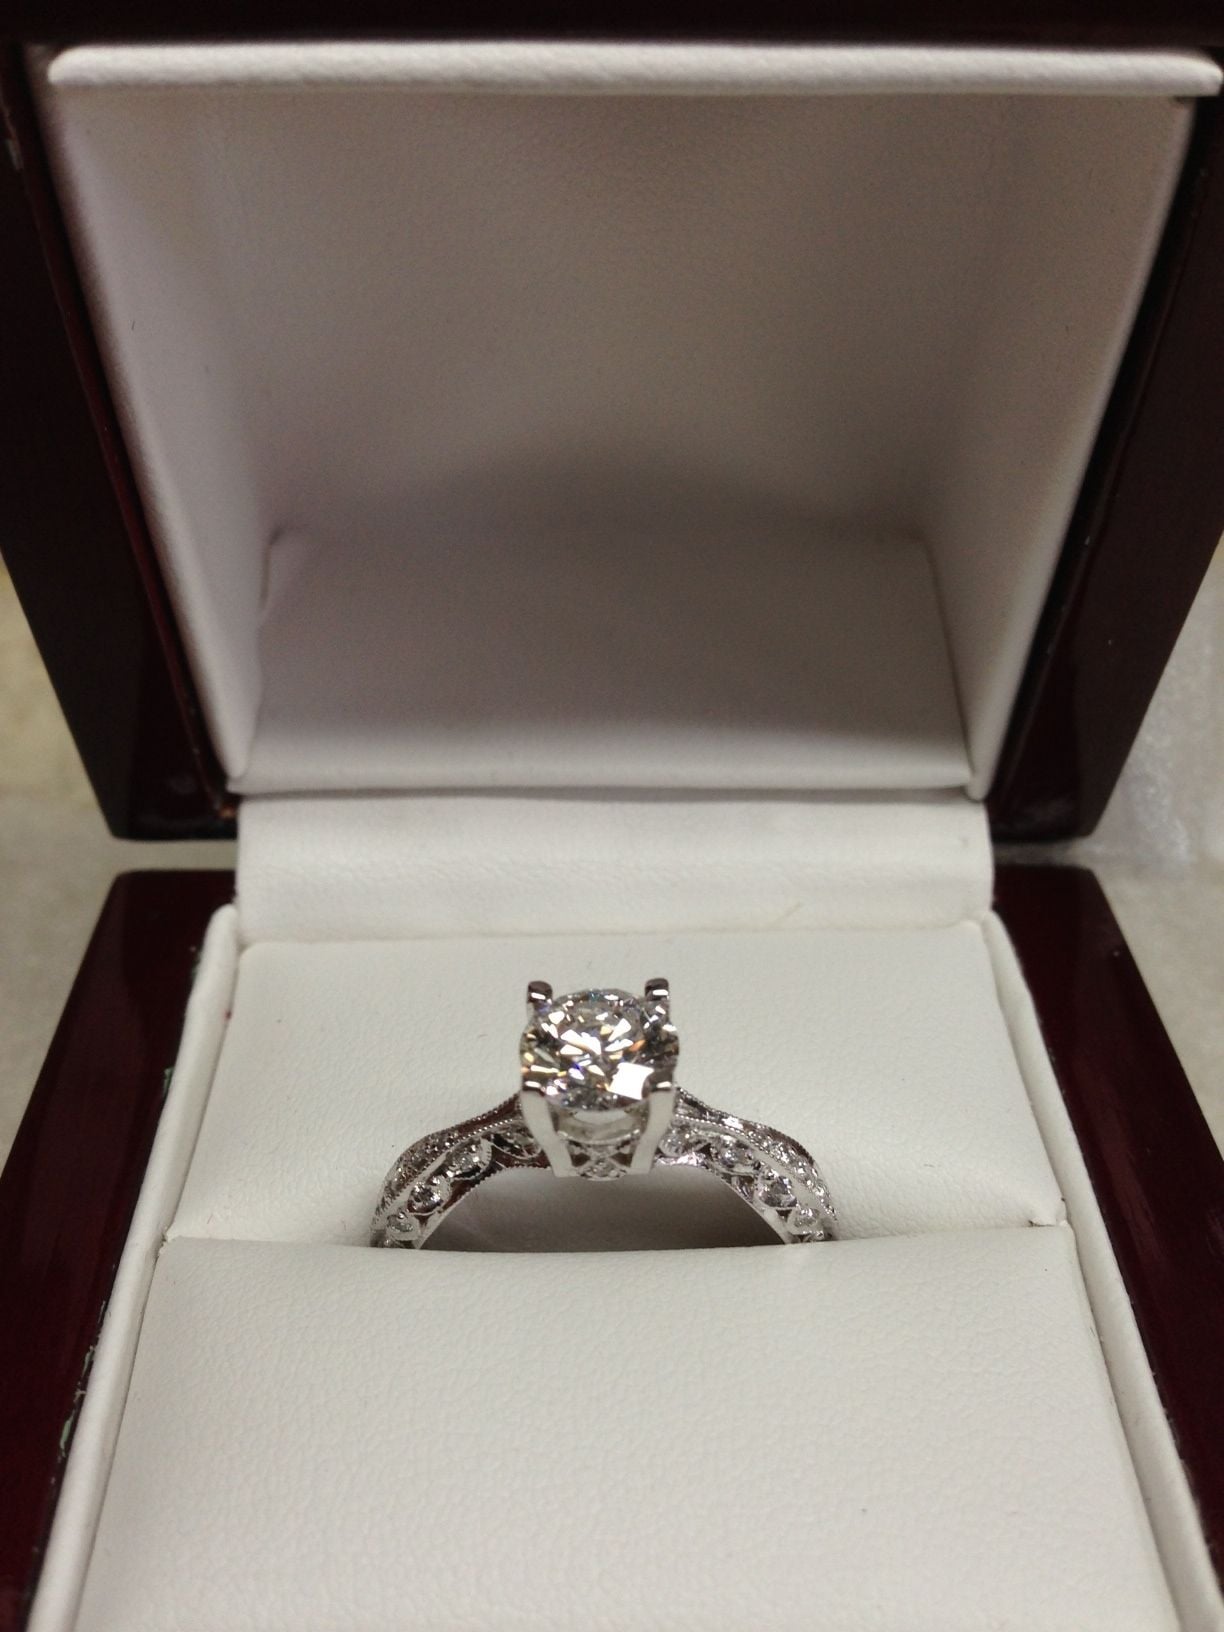 Engagement Ring - The Hull Truth - Boating and Fishing Forum